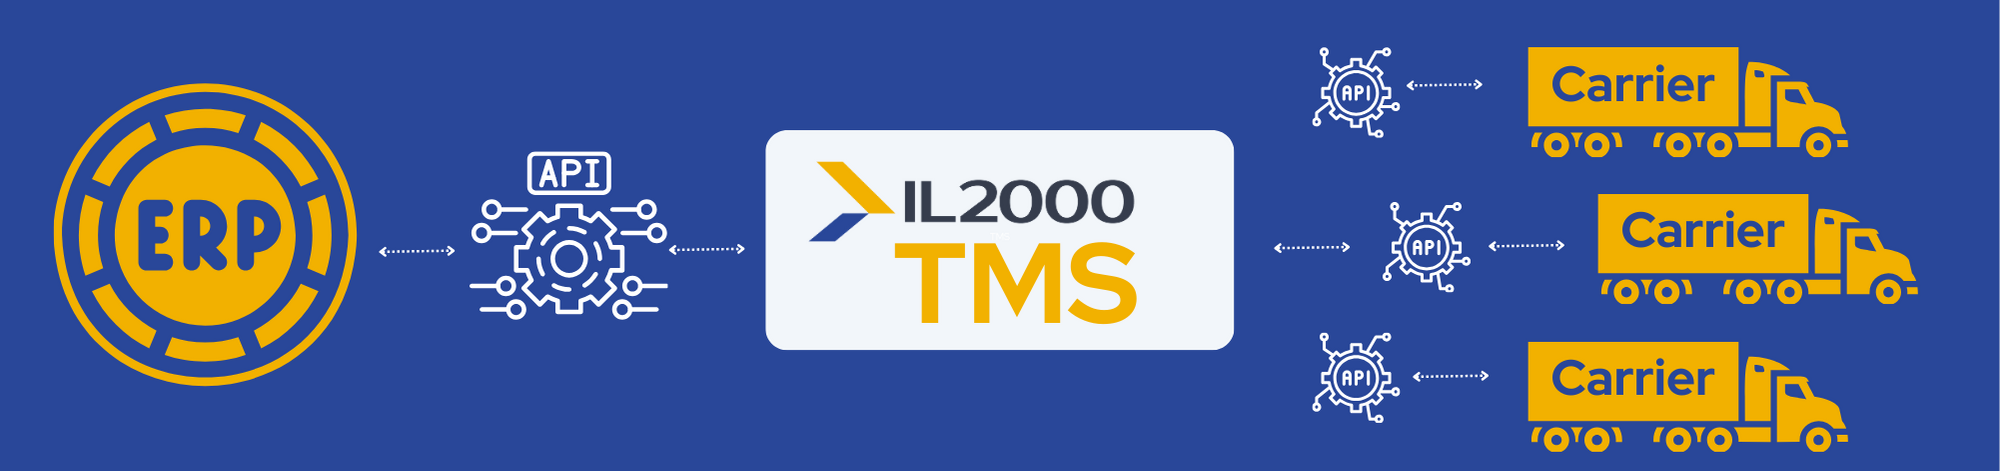 freight API integrates client and carrier to IL2000 TMS